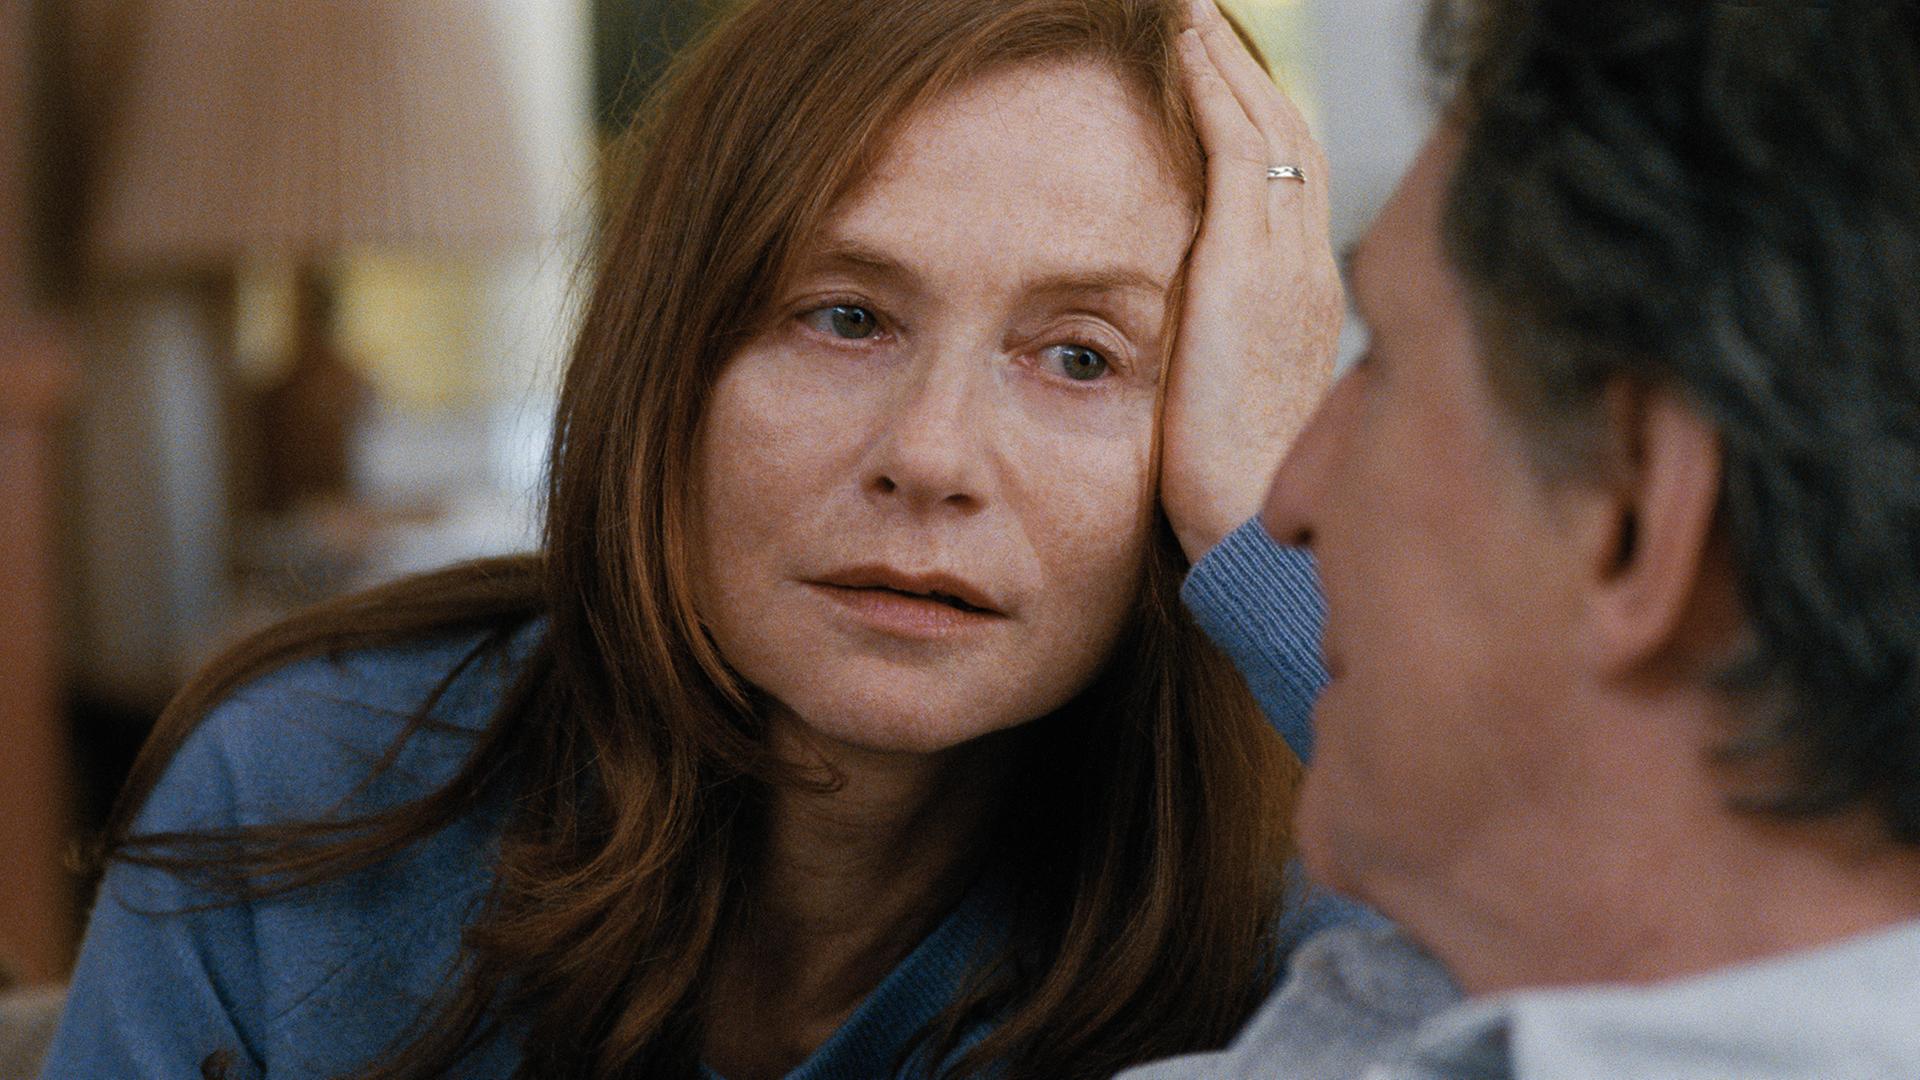 Isabelle Huppert als Isabelle Reed in dem Film "Louder Than Bombs".